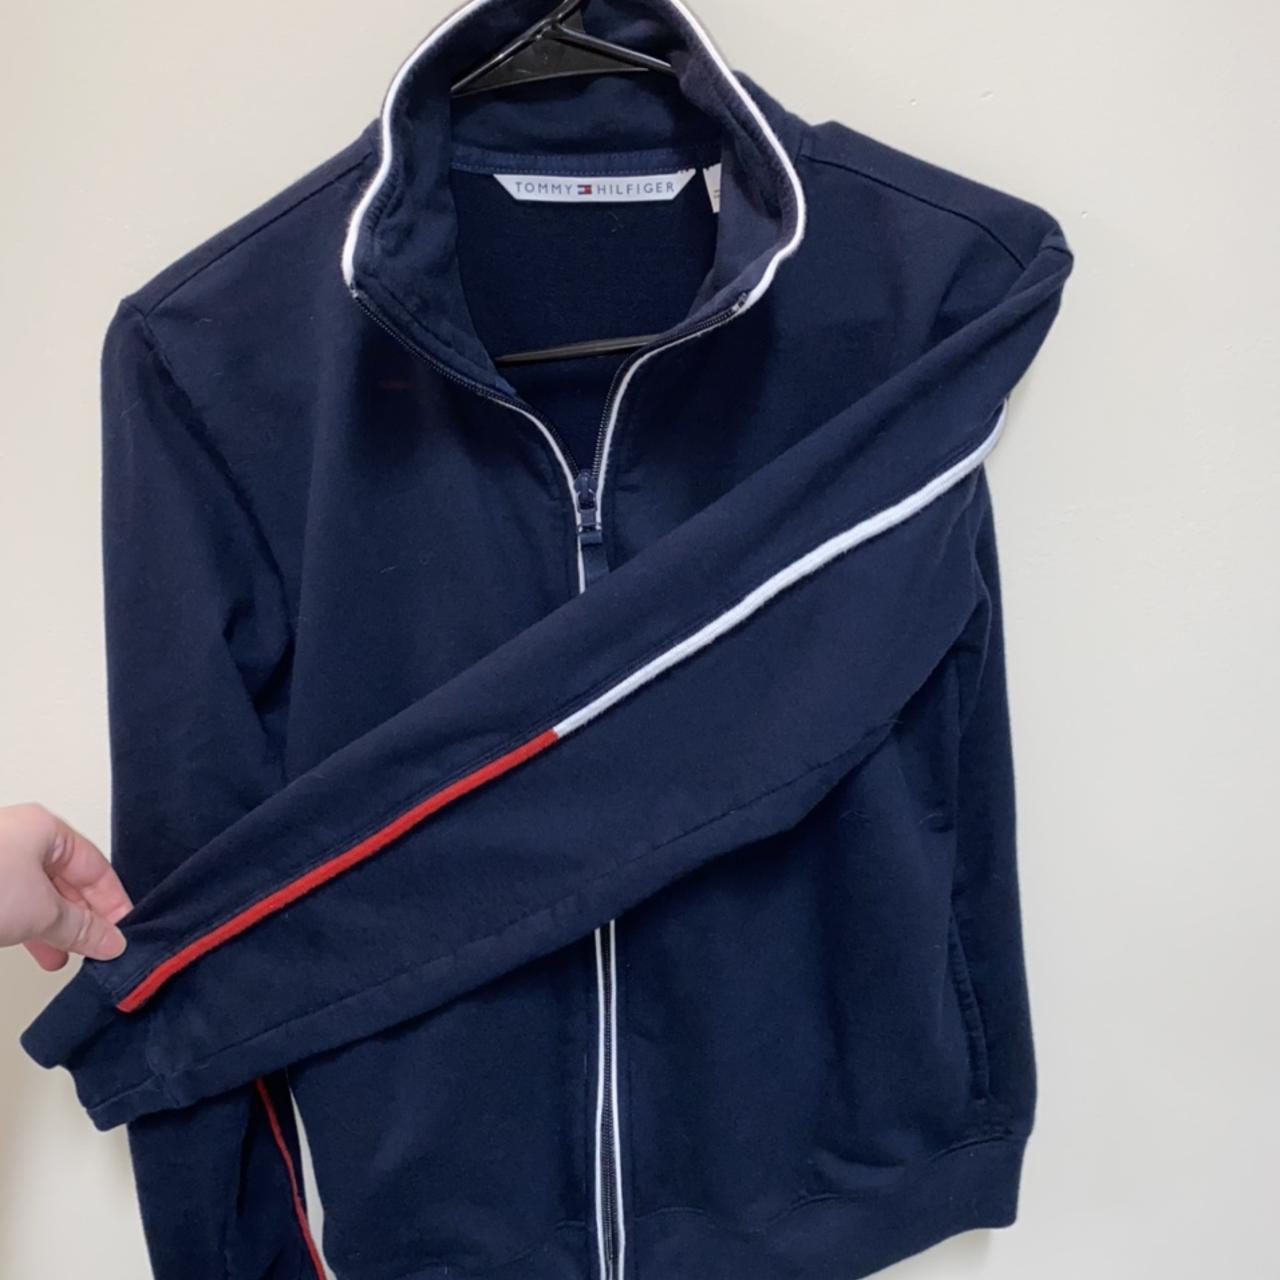 🧩Tommy Hilfiger navy blue zip up jacket with red and... - Depop